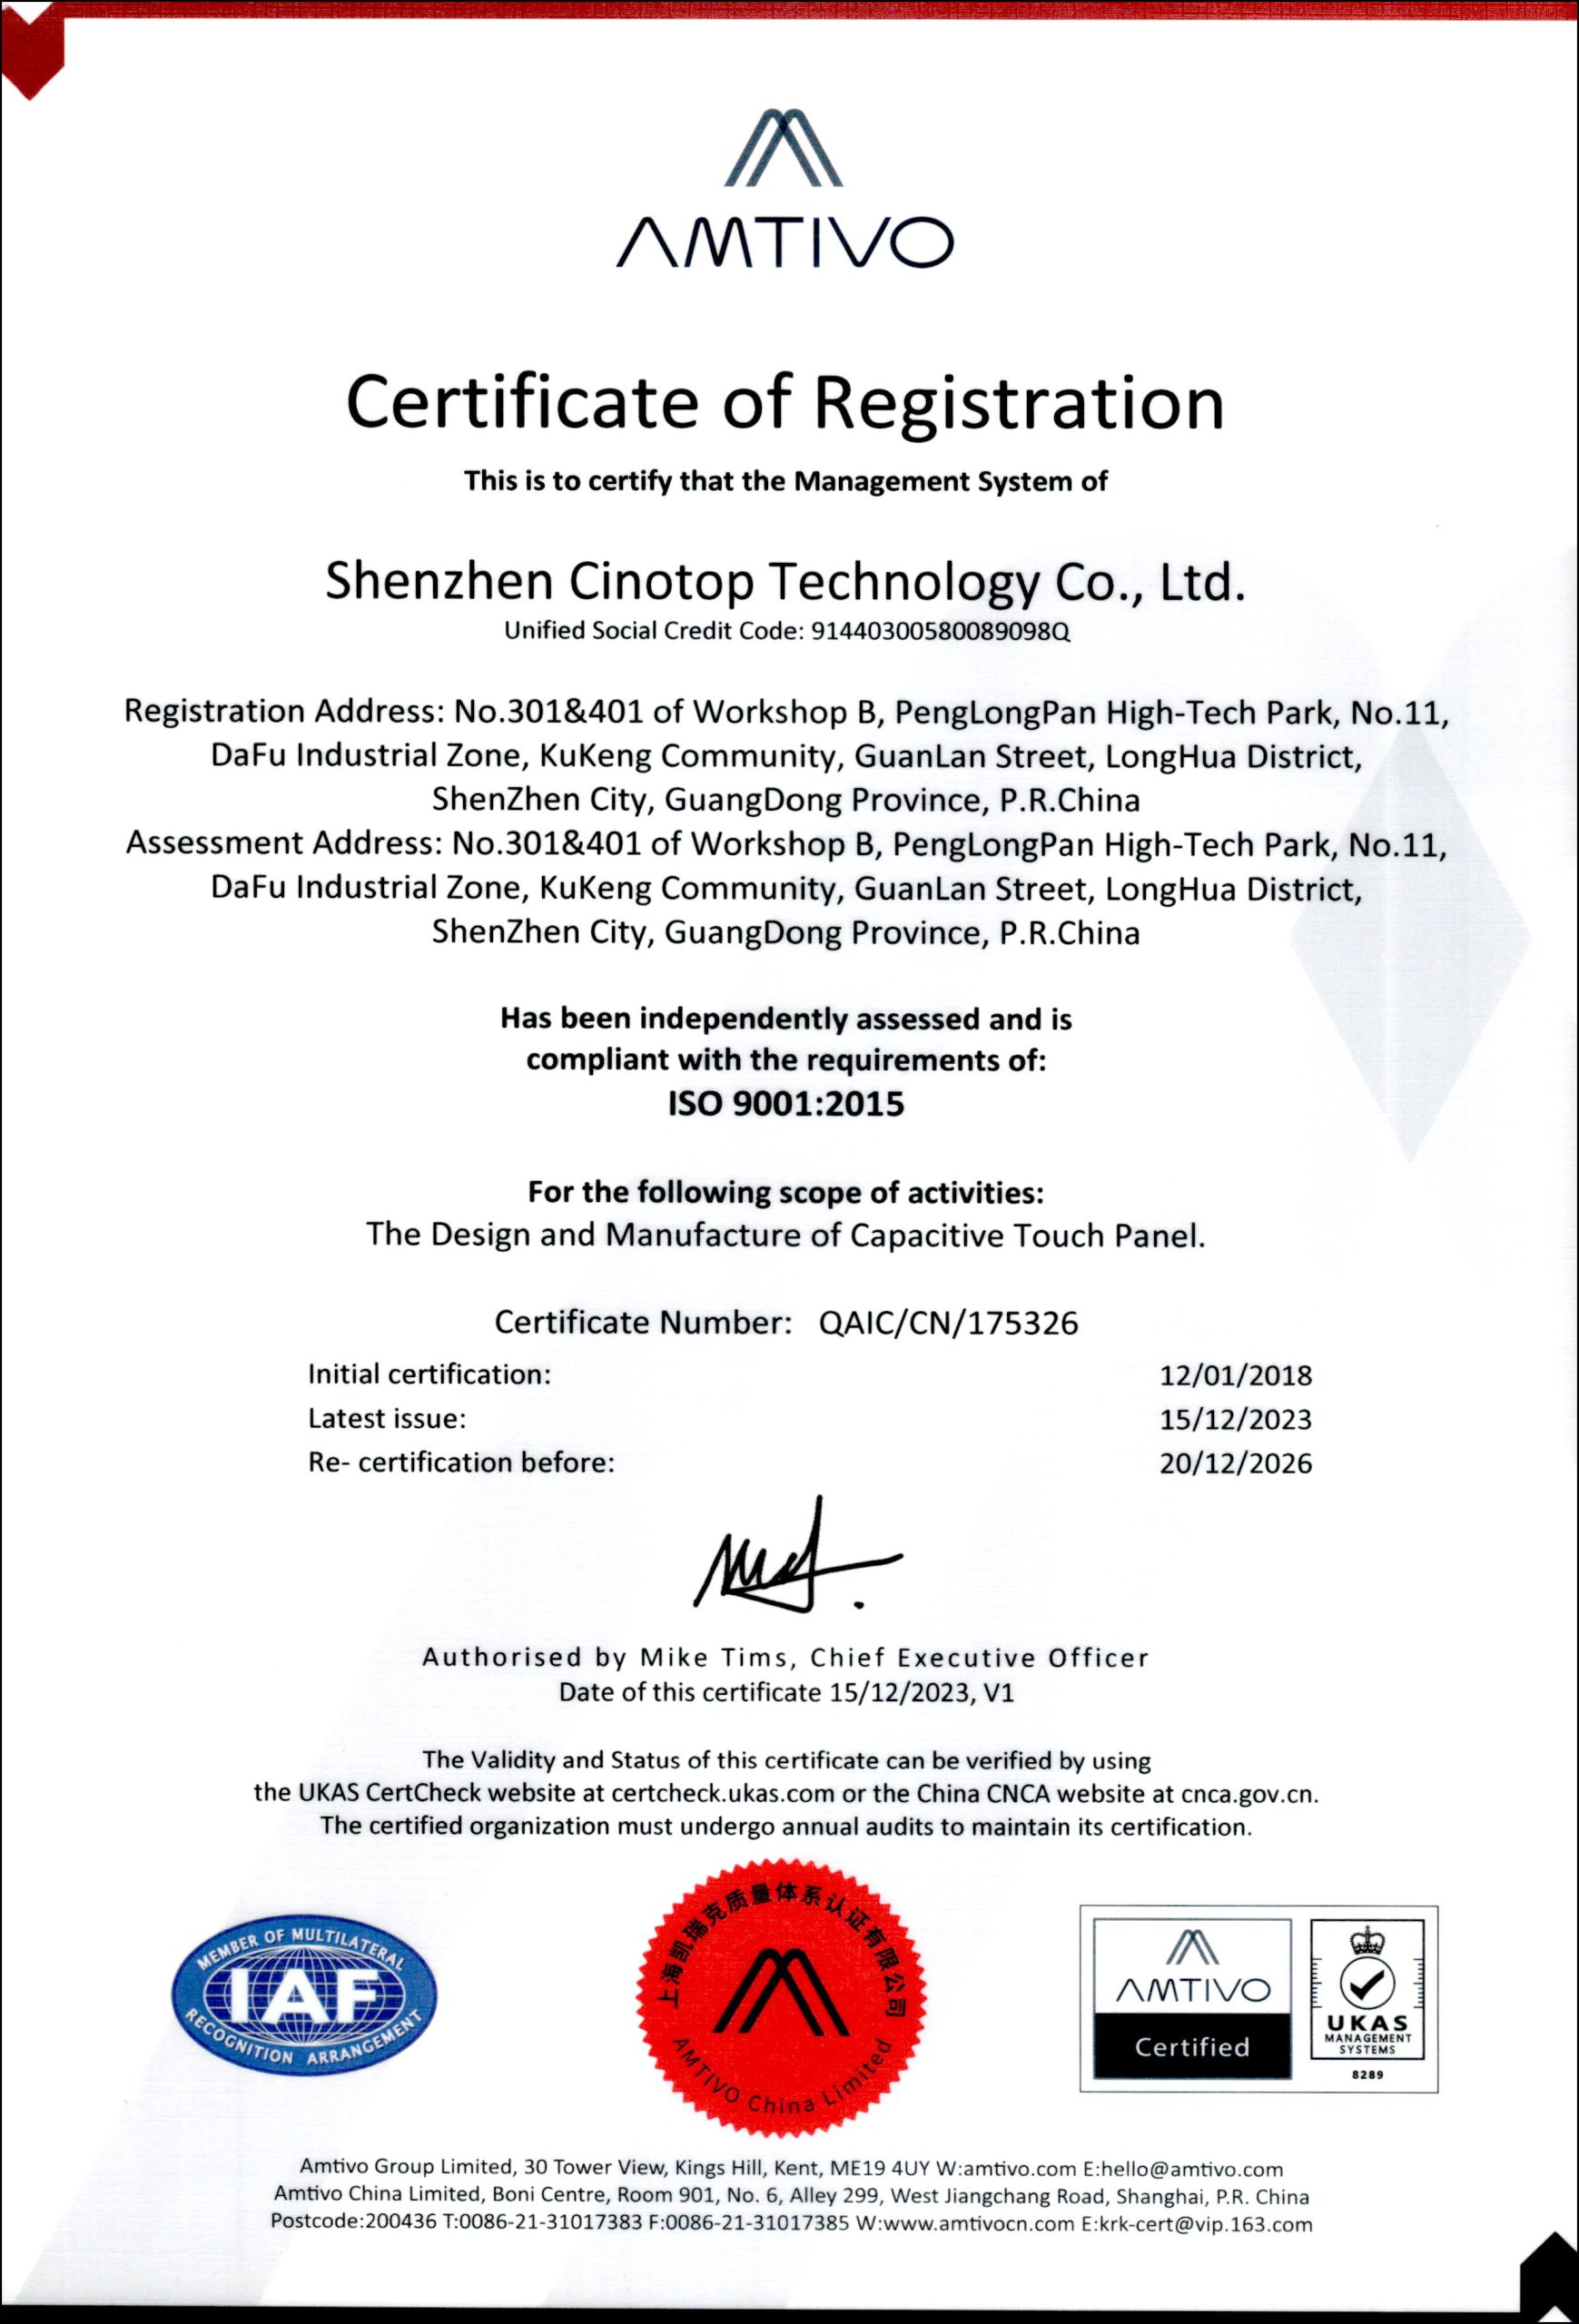 ISO 9001 quality management system certification